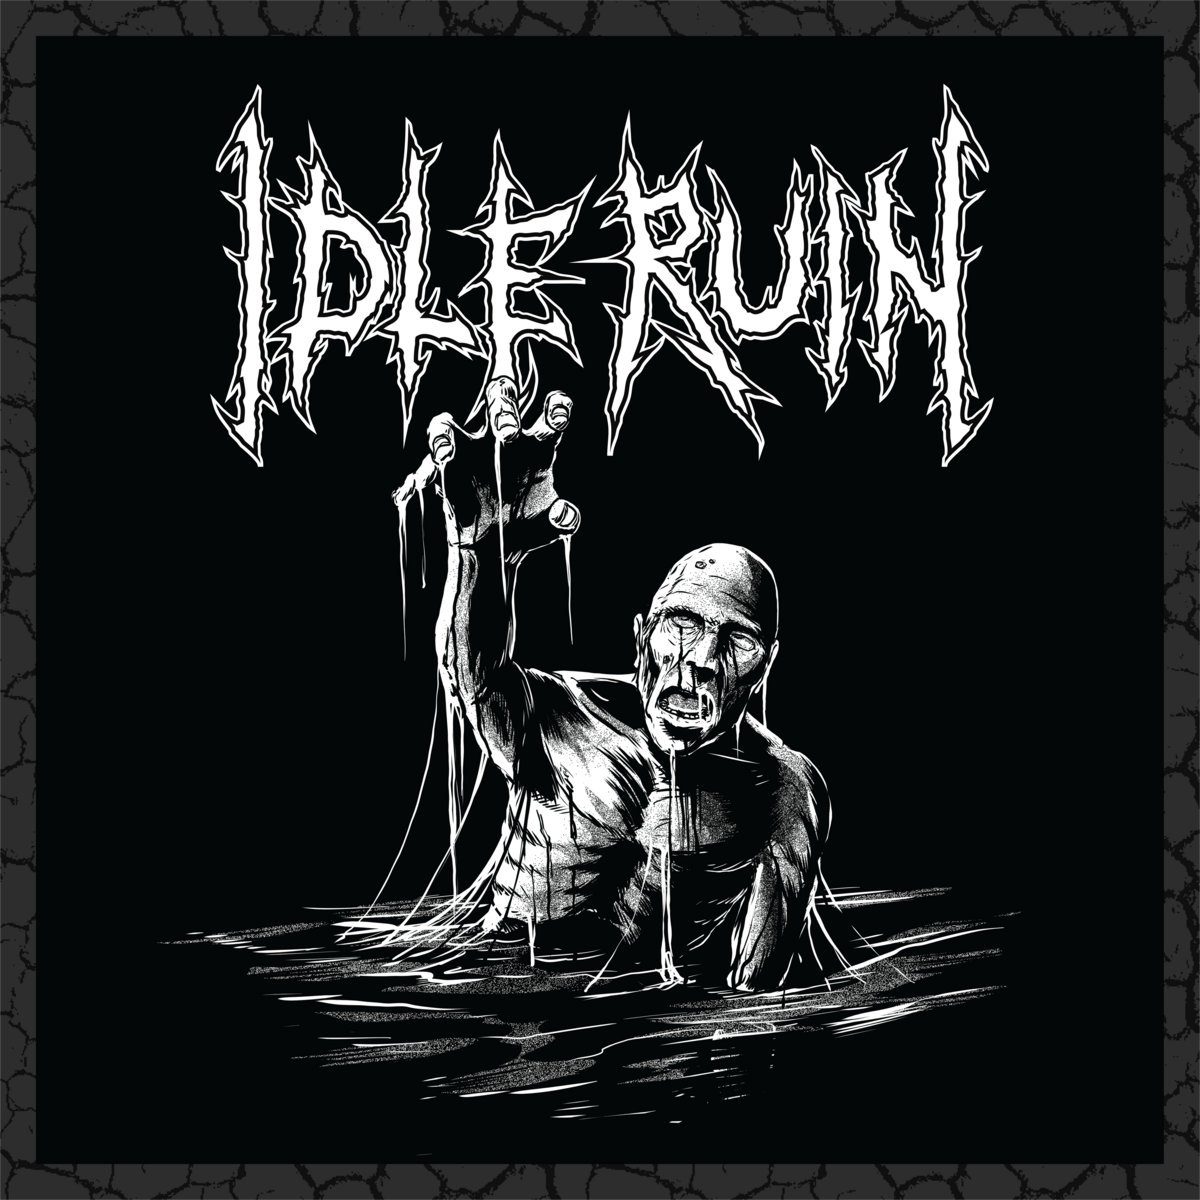 Interview with IDLE RUIN